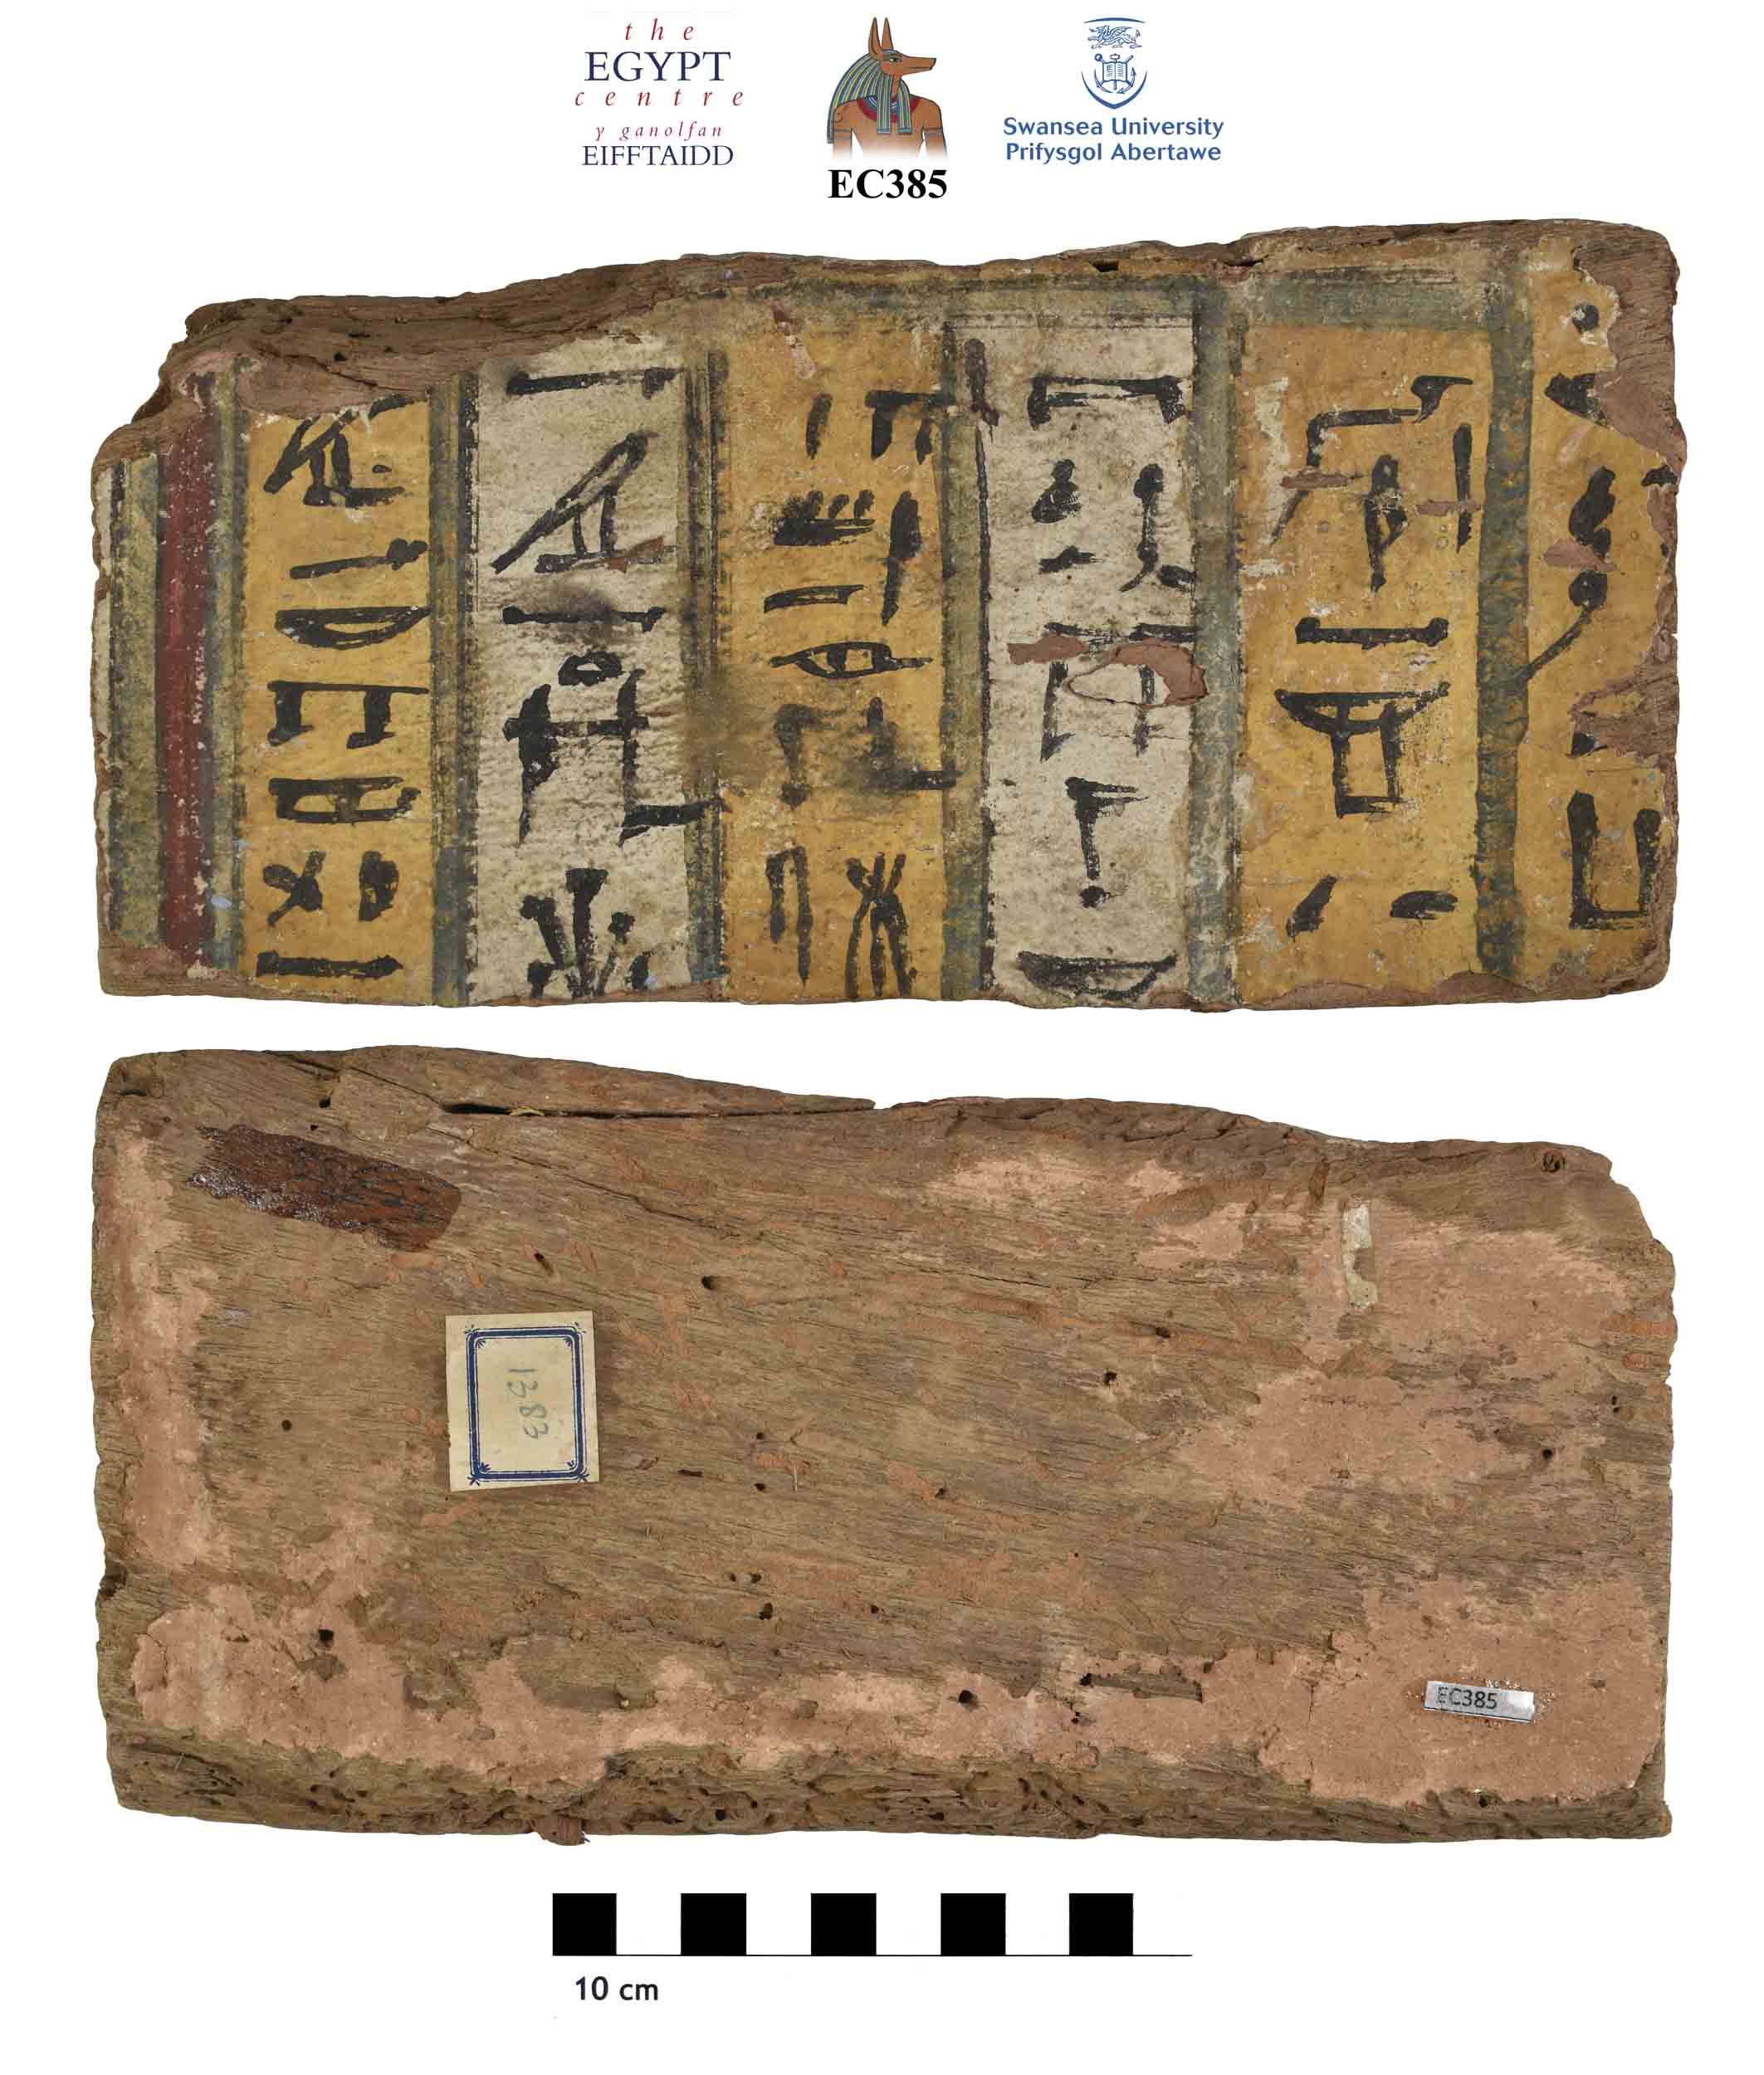 Image for: Fragment of a canopic chest